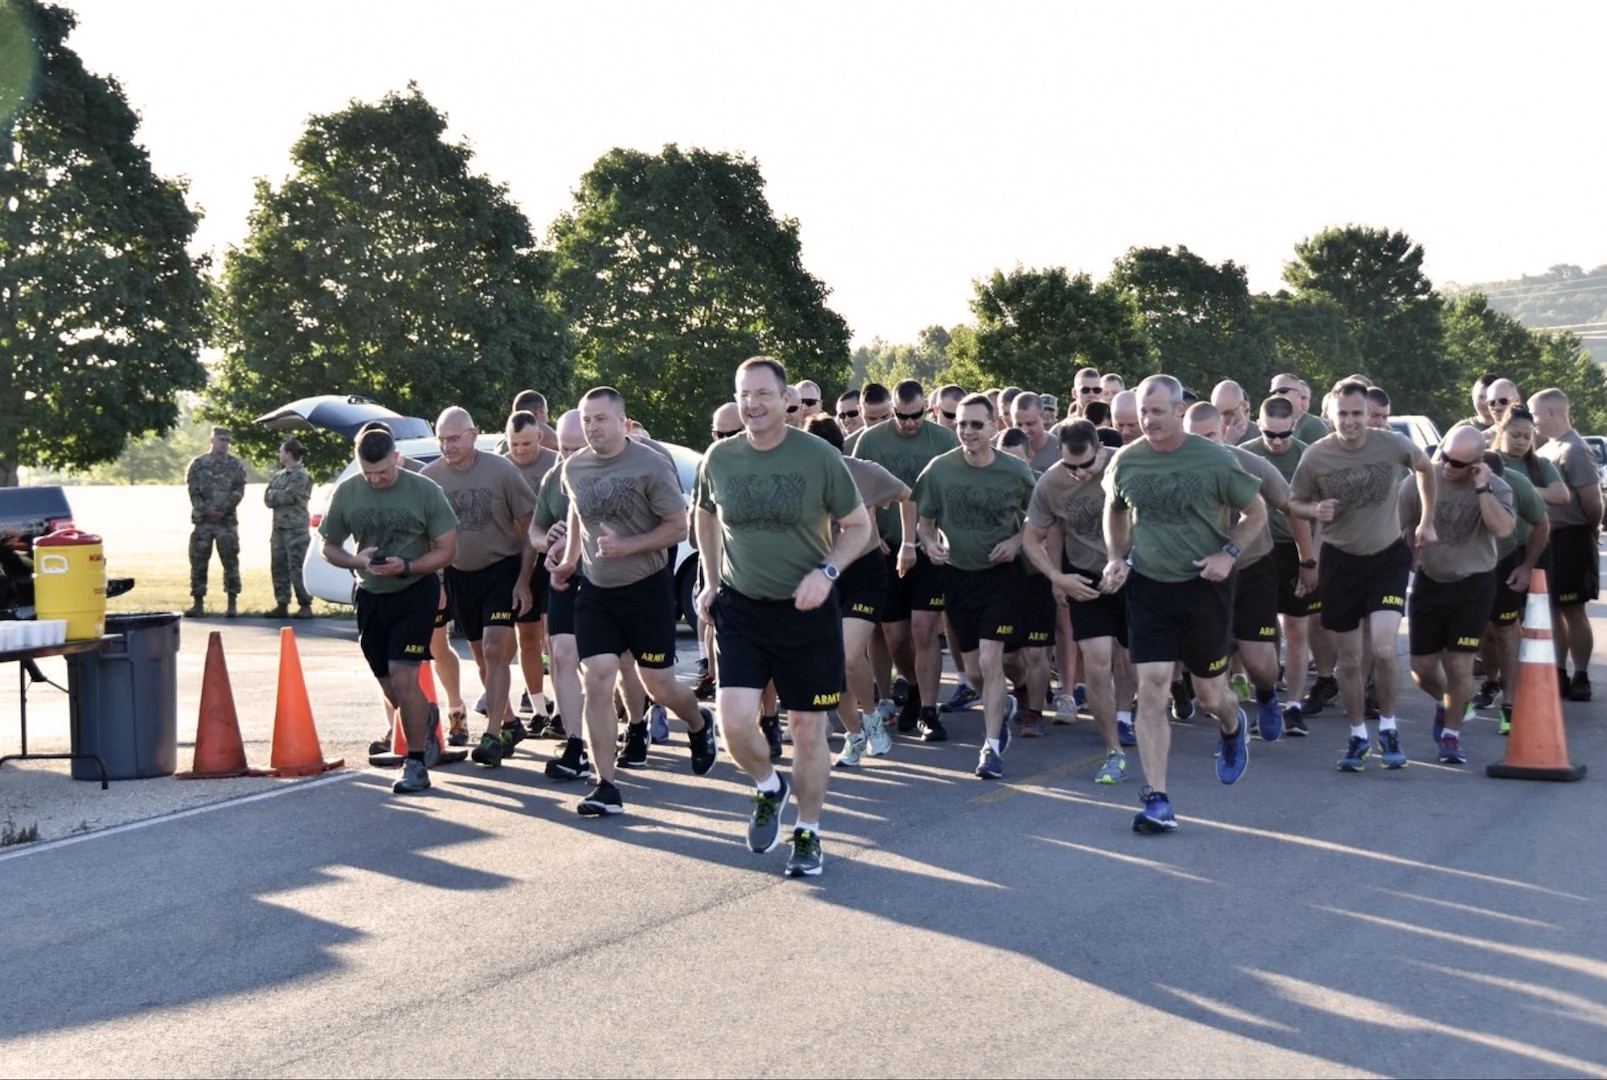 Chief Warrant Officer Five (CW5) Patrick J. Muenks leads runners during an event commemorating the 100th year of the Warrant Officer Cohort.